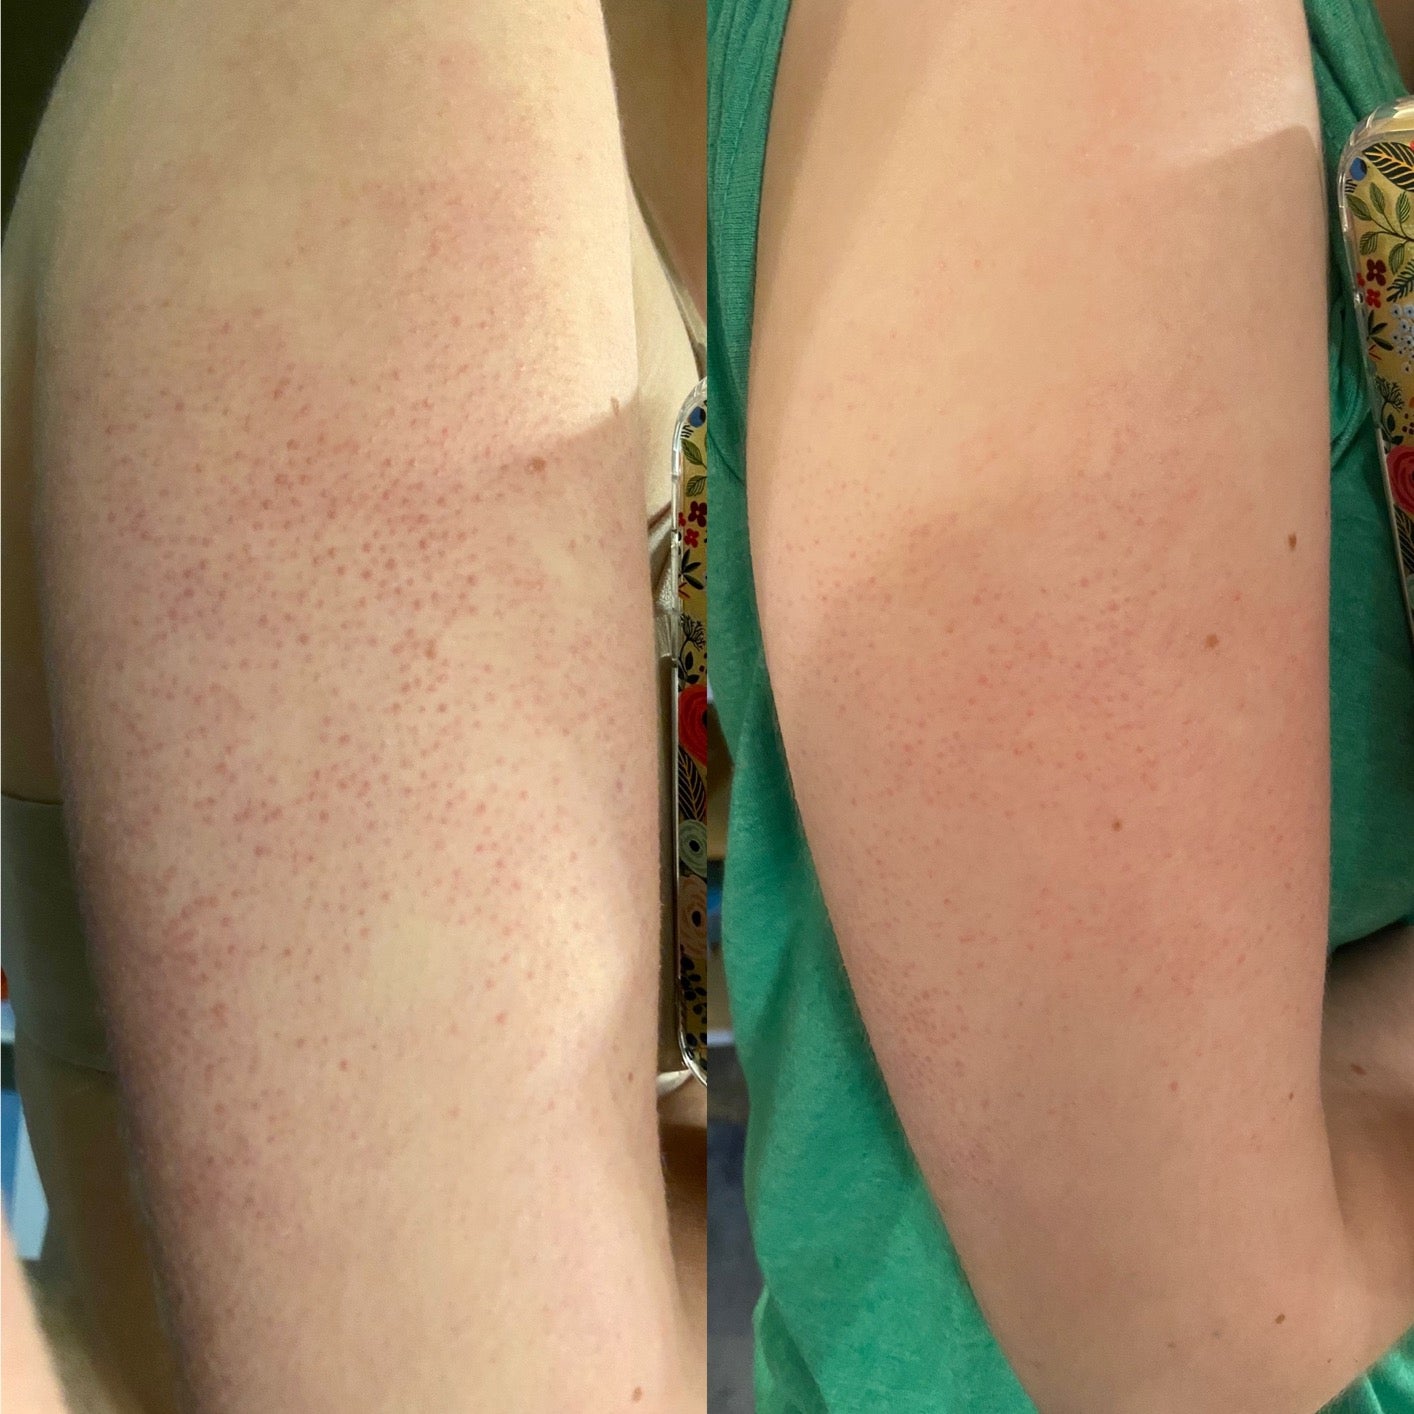 b&a photo of upper arm with small red bumps (left) and same arm with a smoother appearance (right) after using vegan body scrub